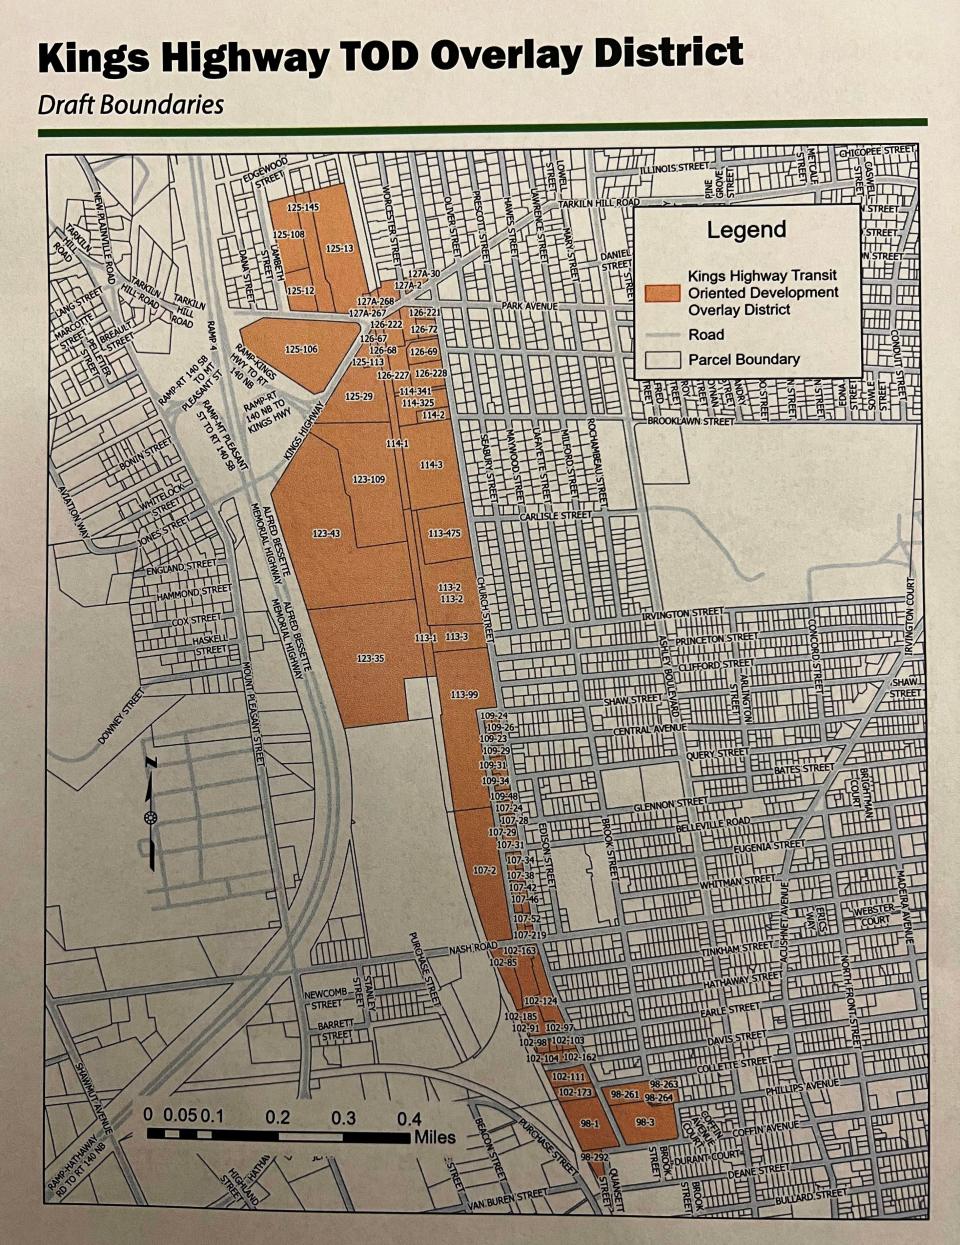 The overlay districts will be designed to encourage mixed-use, apartments and condos on the residential side; and offices, artist workshops, medical offices, and light-advanced manufacturing on the commercial side, according to the city-SRPEDD team.